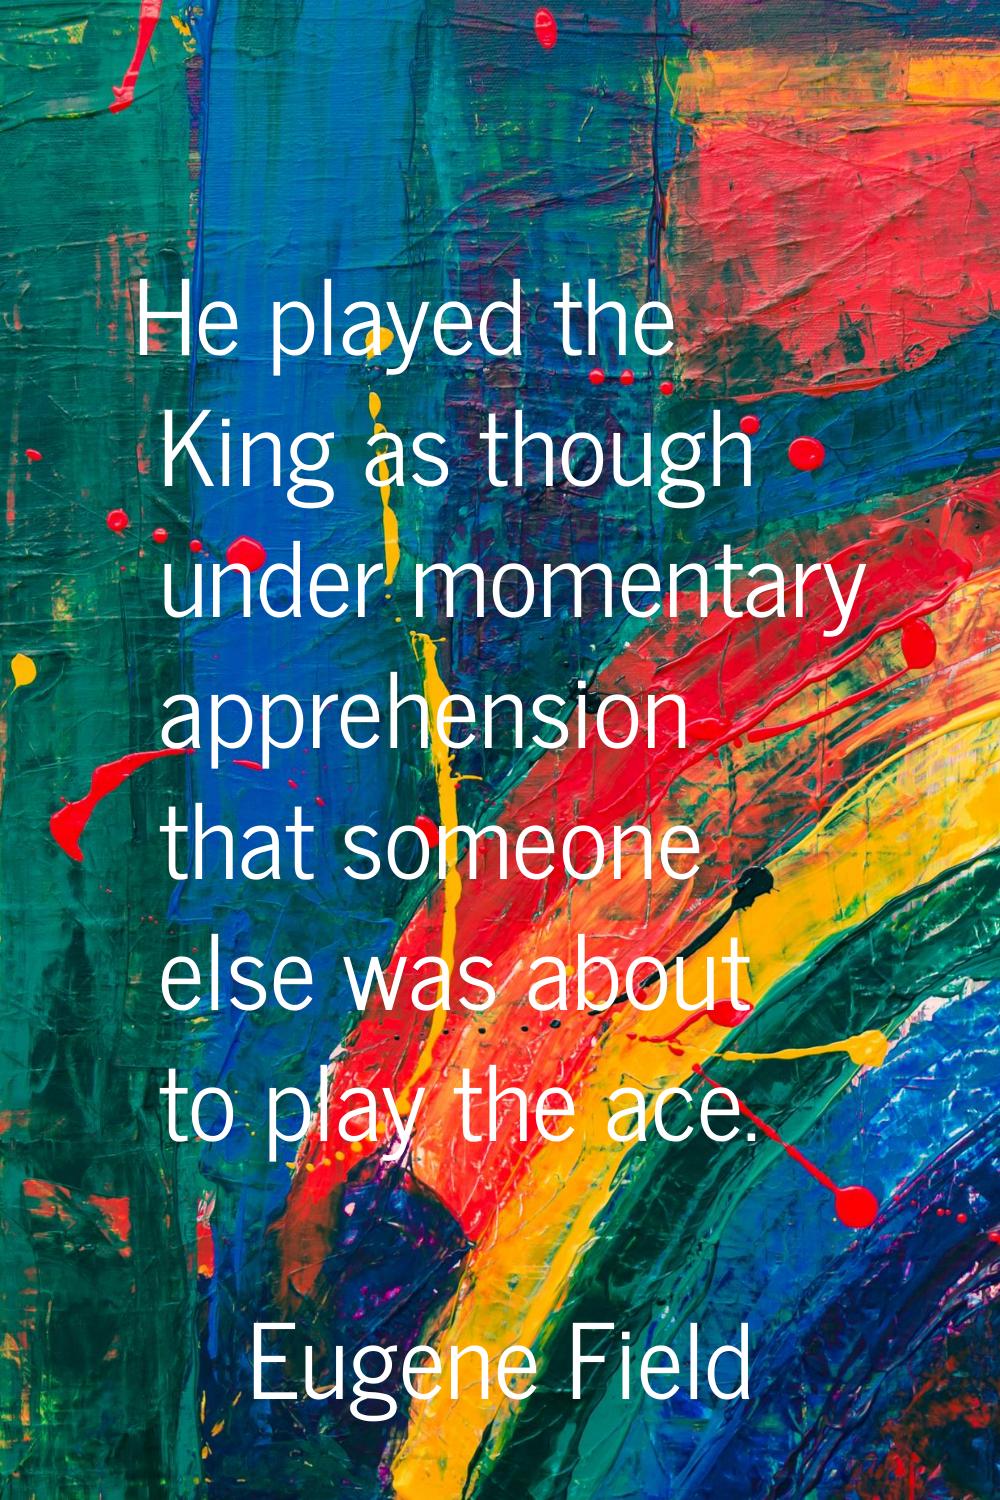 He played the King as though under momentary apprehension that someone else was about to play the a